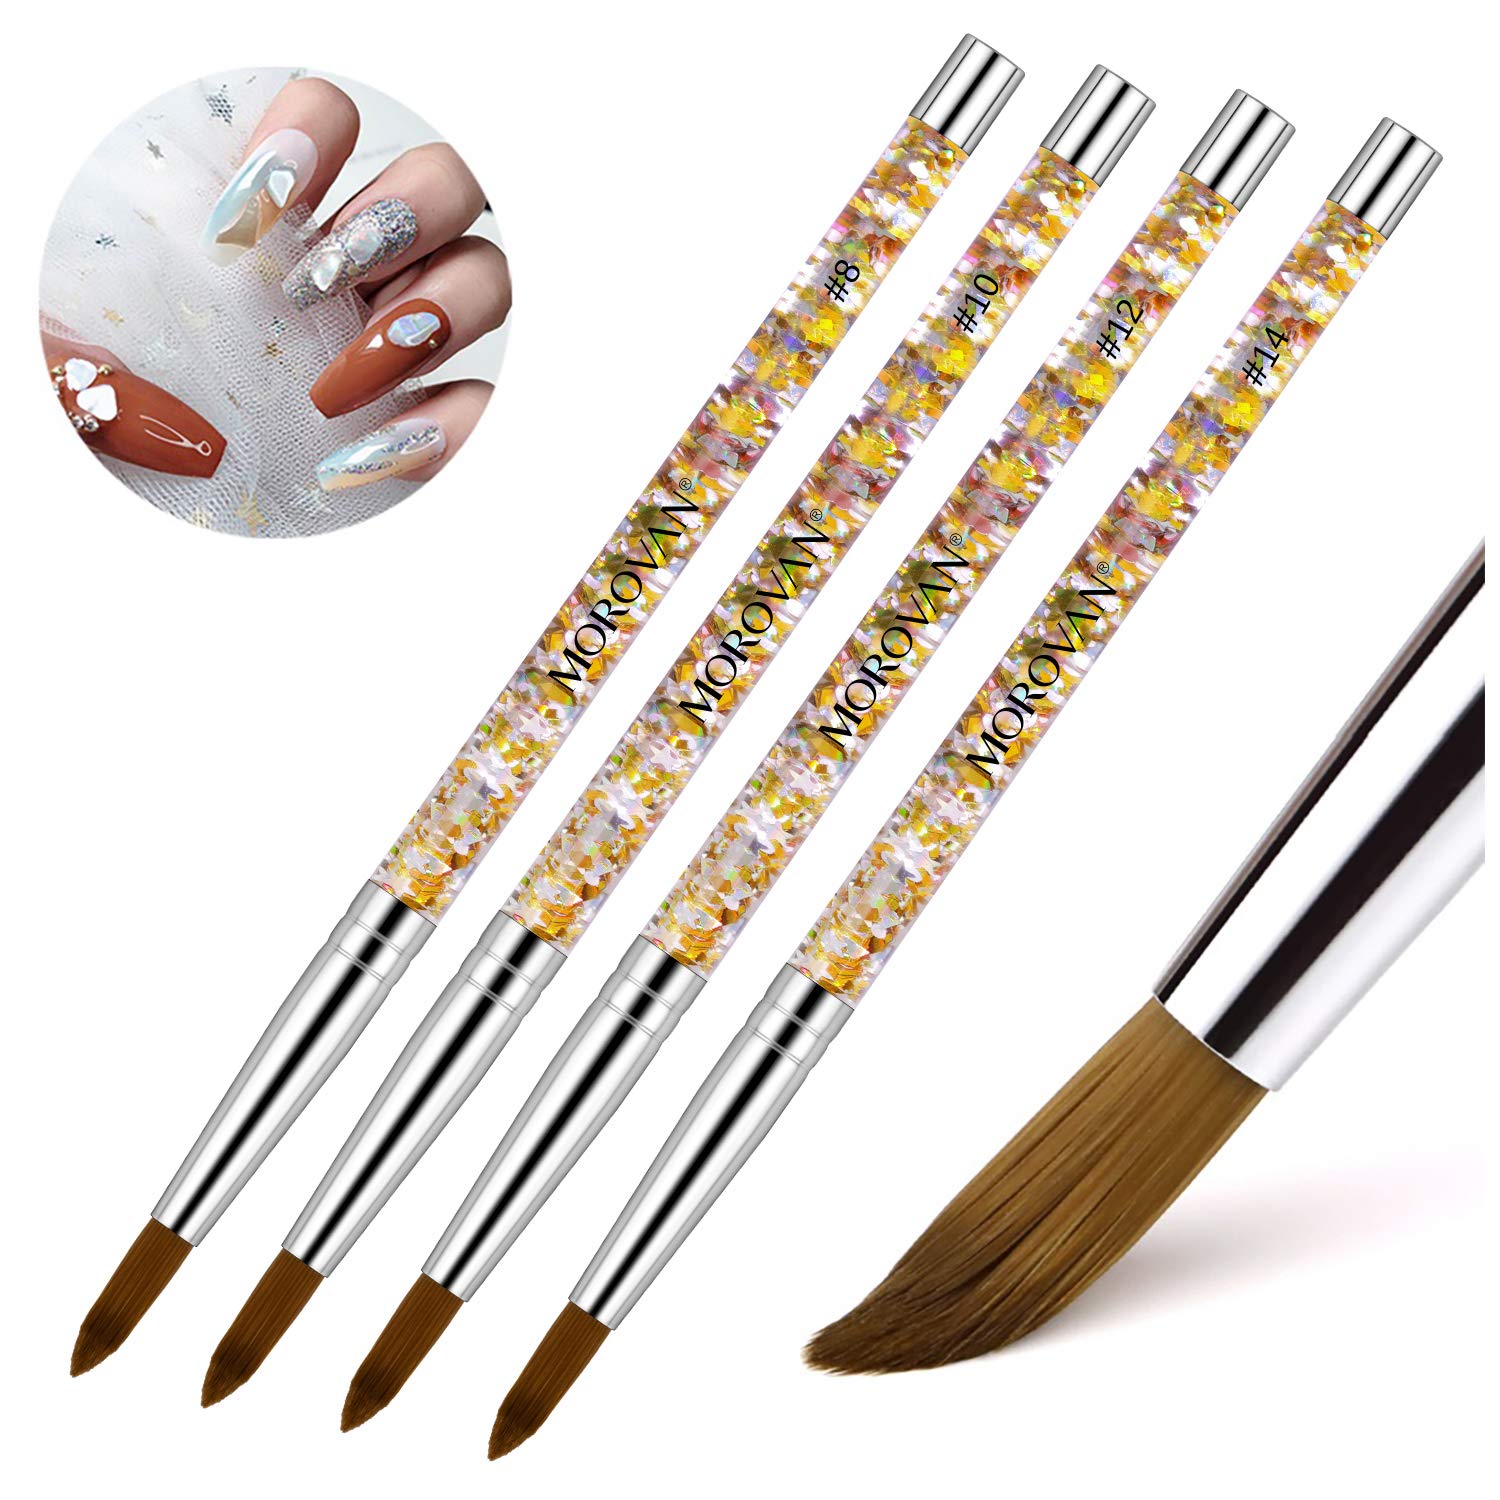 Amazon.com : Kolinsky Acrylic Nail Brush Professional Acrylic Brushes for  Nails with Wood Handle Sable Hair Round Oval Nail Art Brushes for Acrylic  Application DIY Home Salon : Beauty & Personal Care